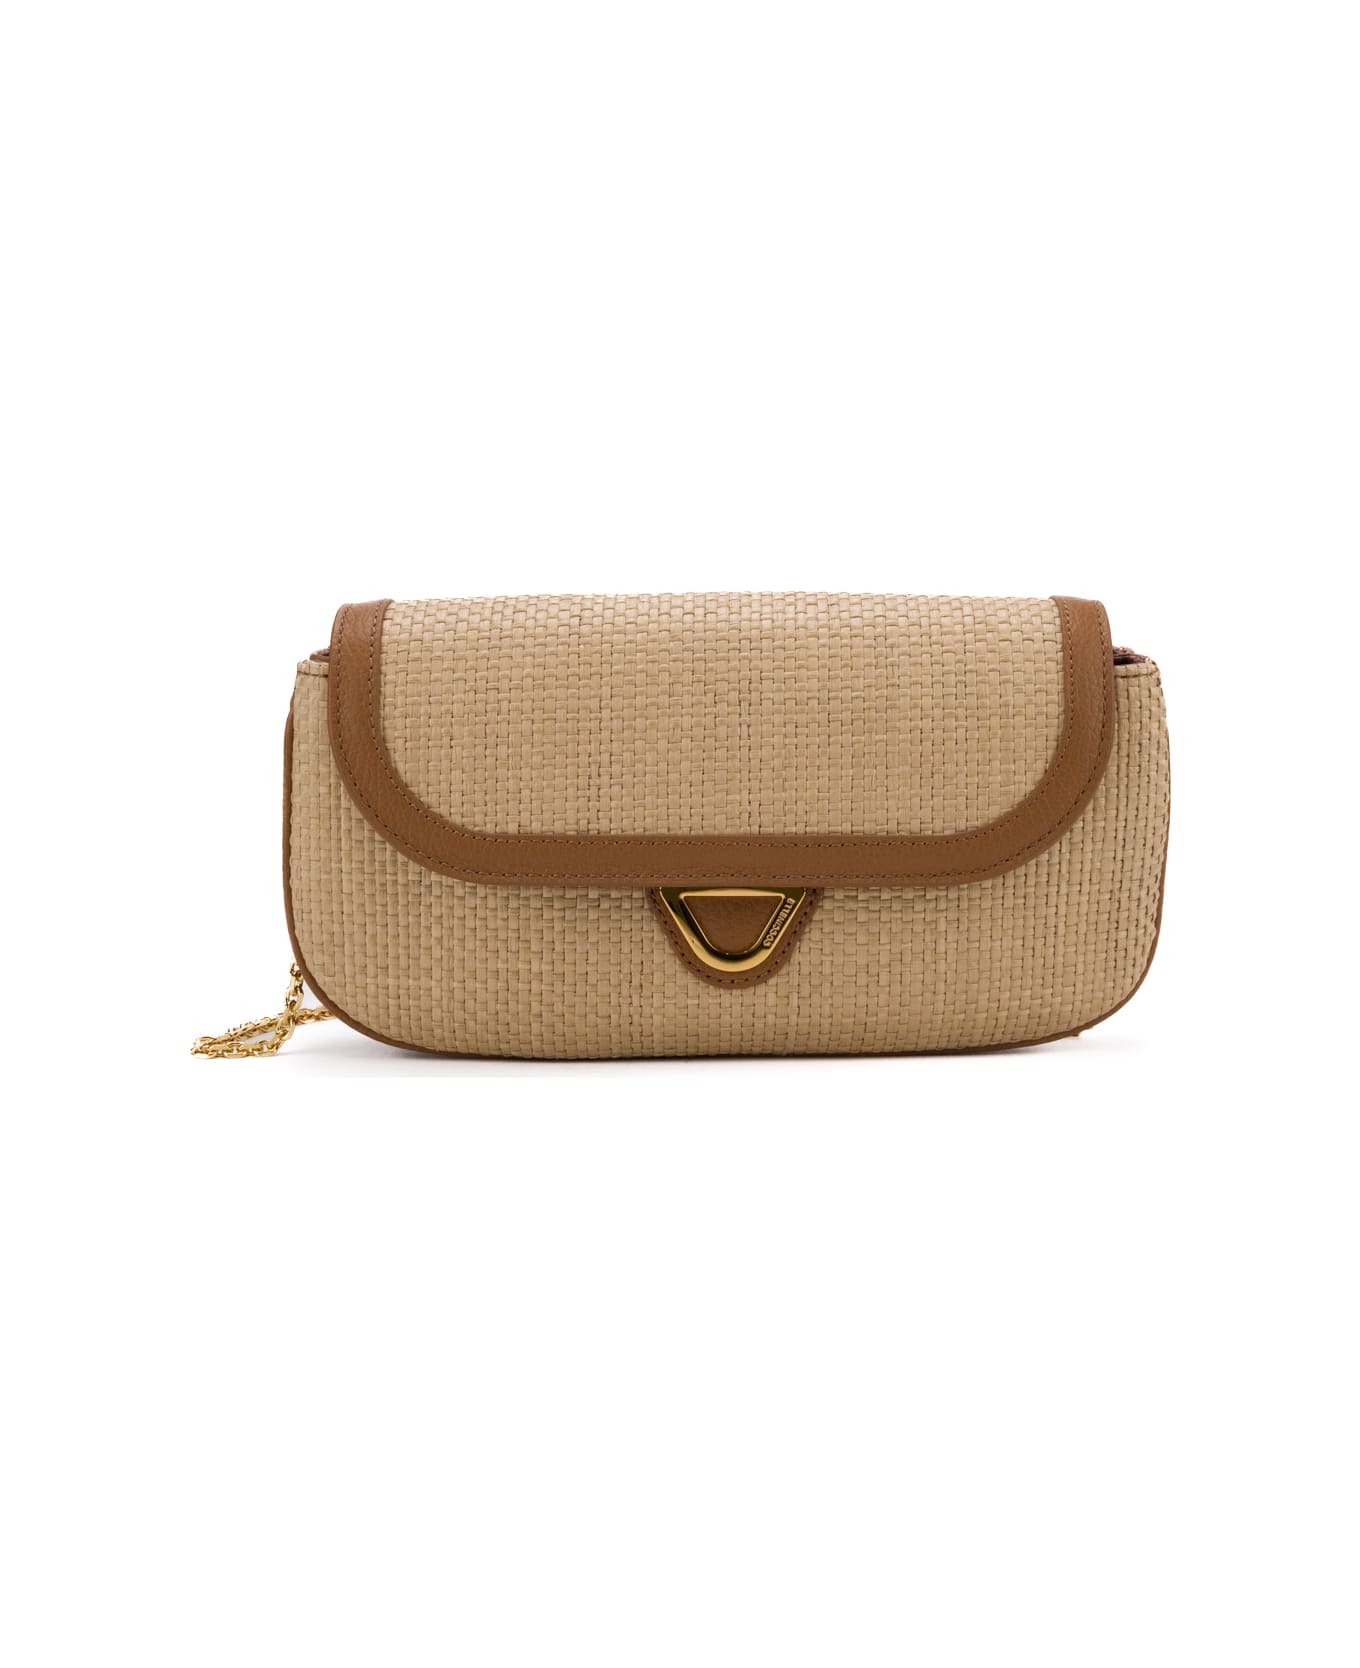 Coccinelle Raffia And Leather Bag - Natural/cuir ショルダーバッグ